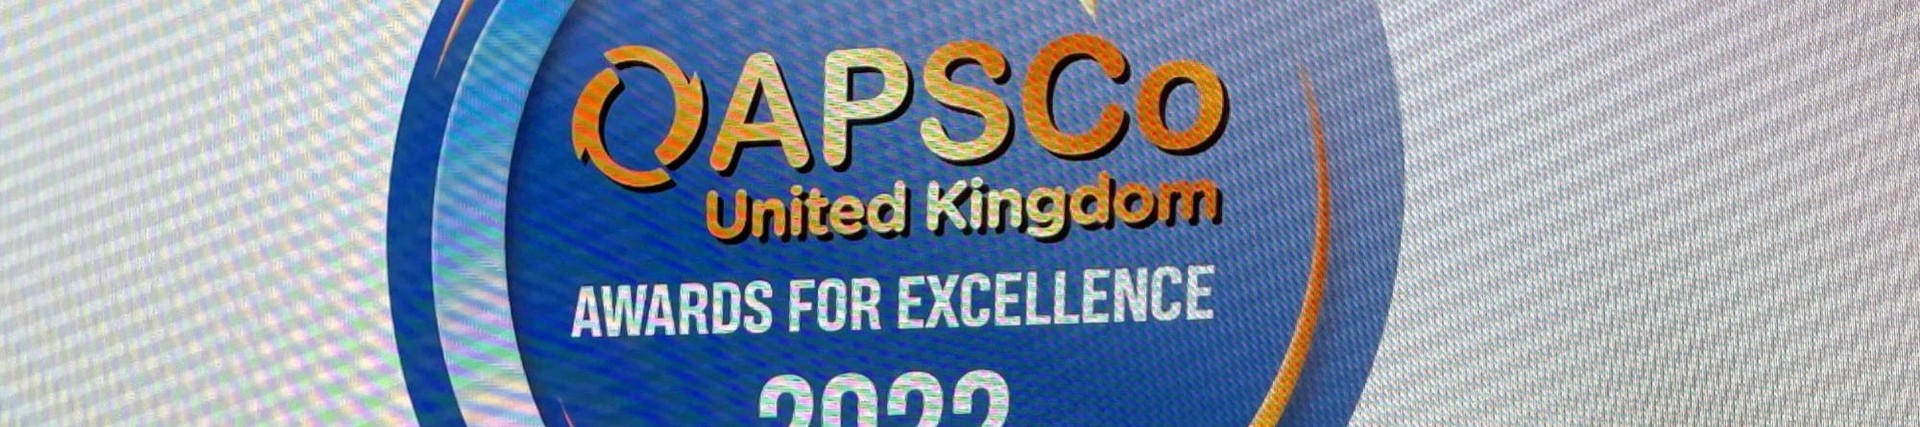 Double win for Morson at APSCo Awards for Excellence